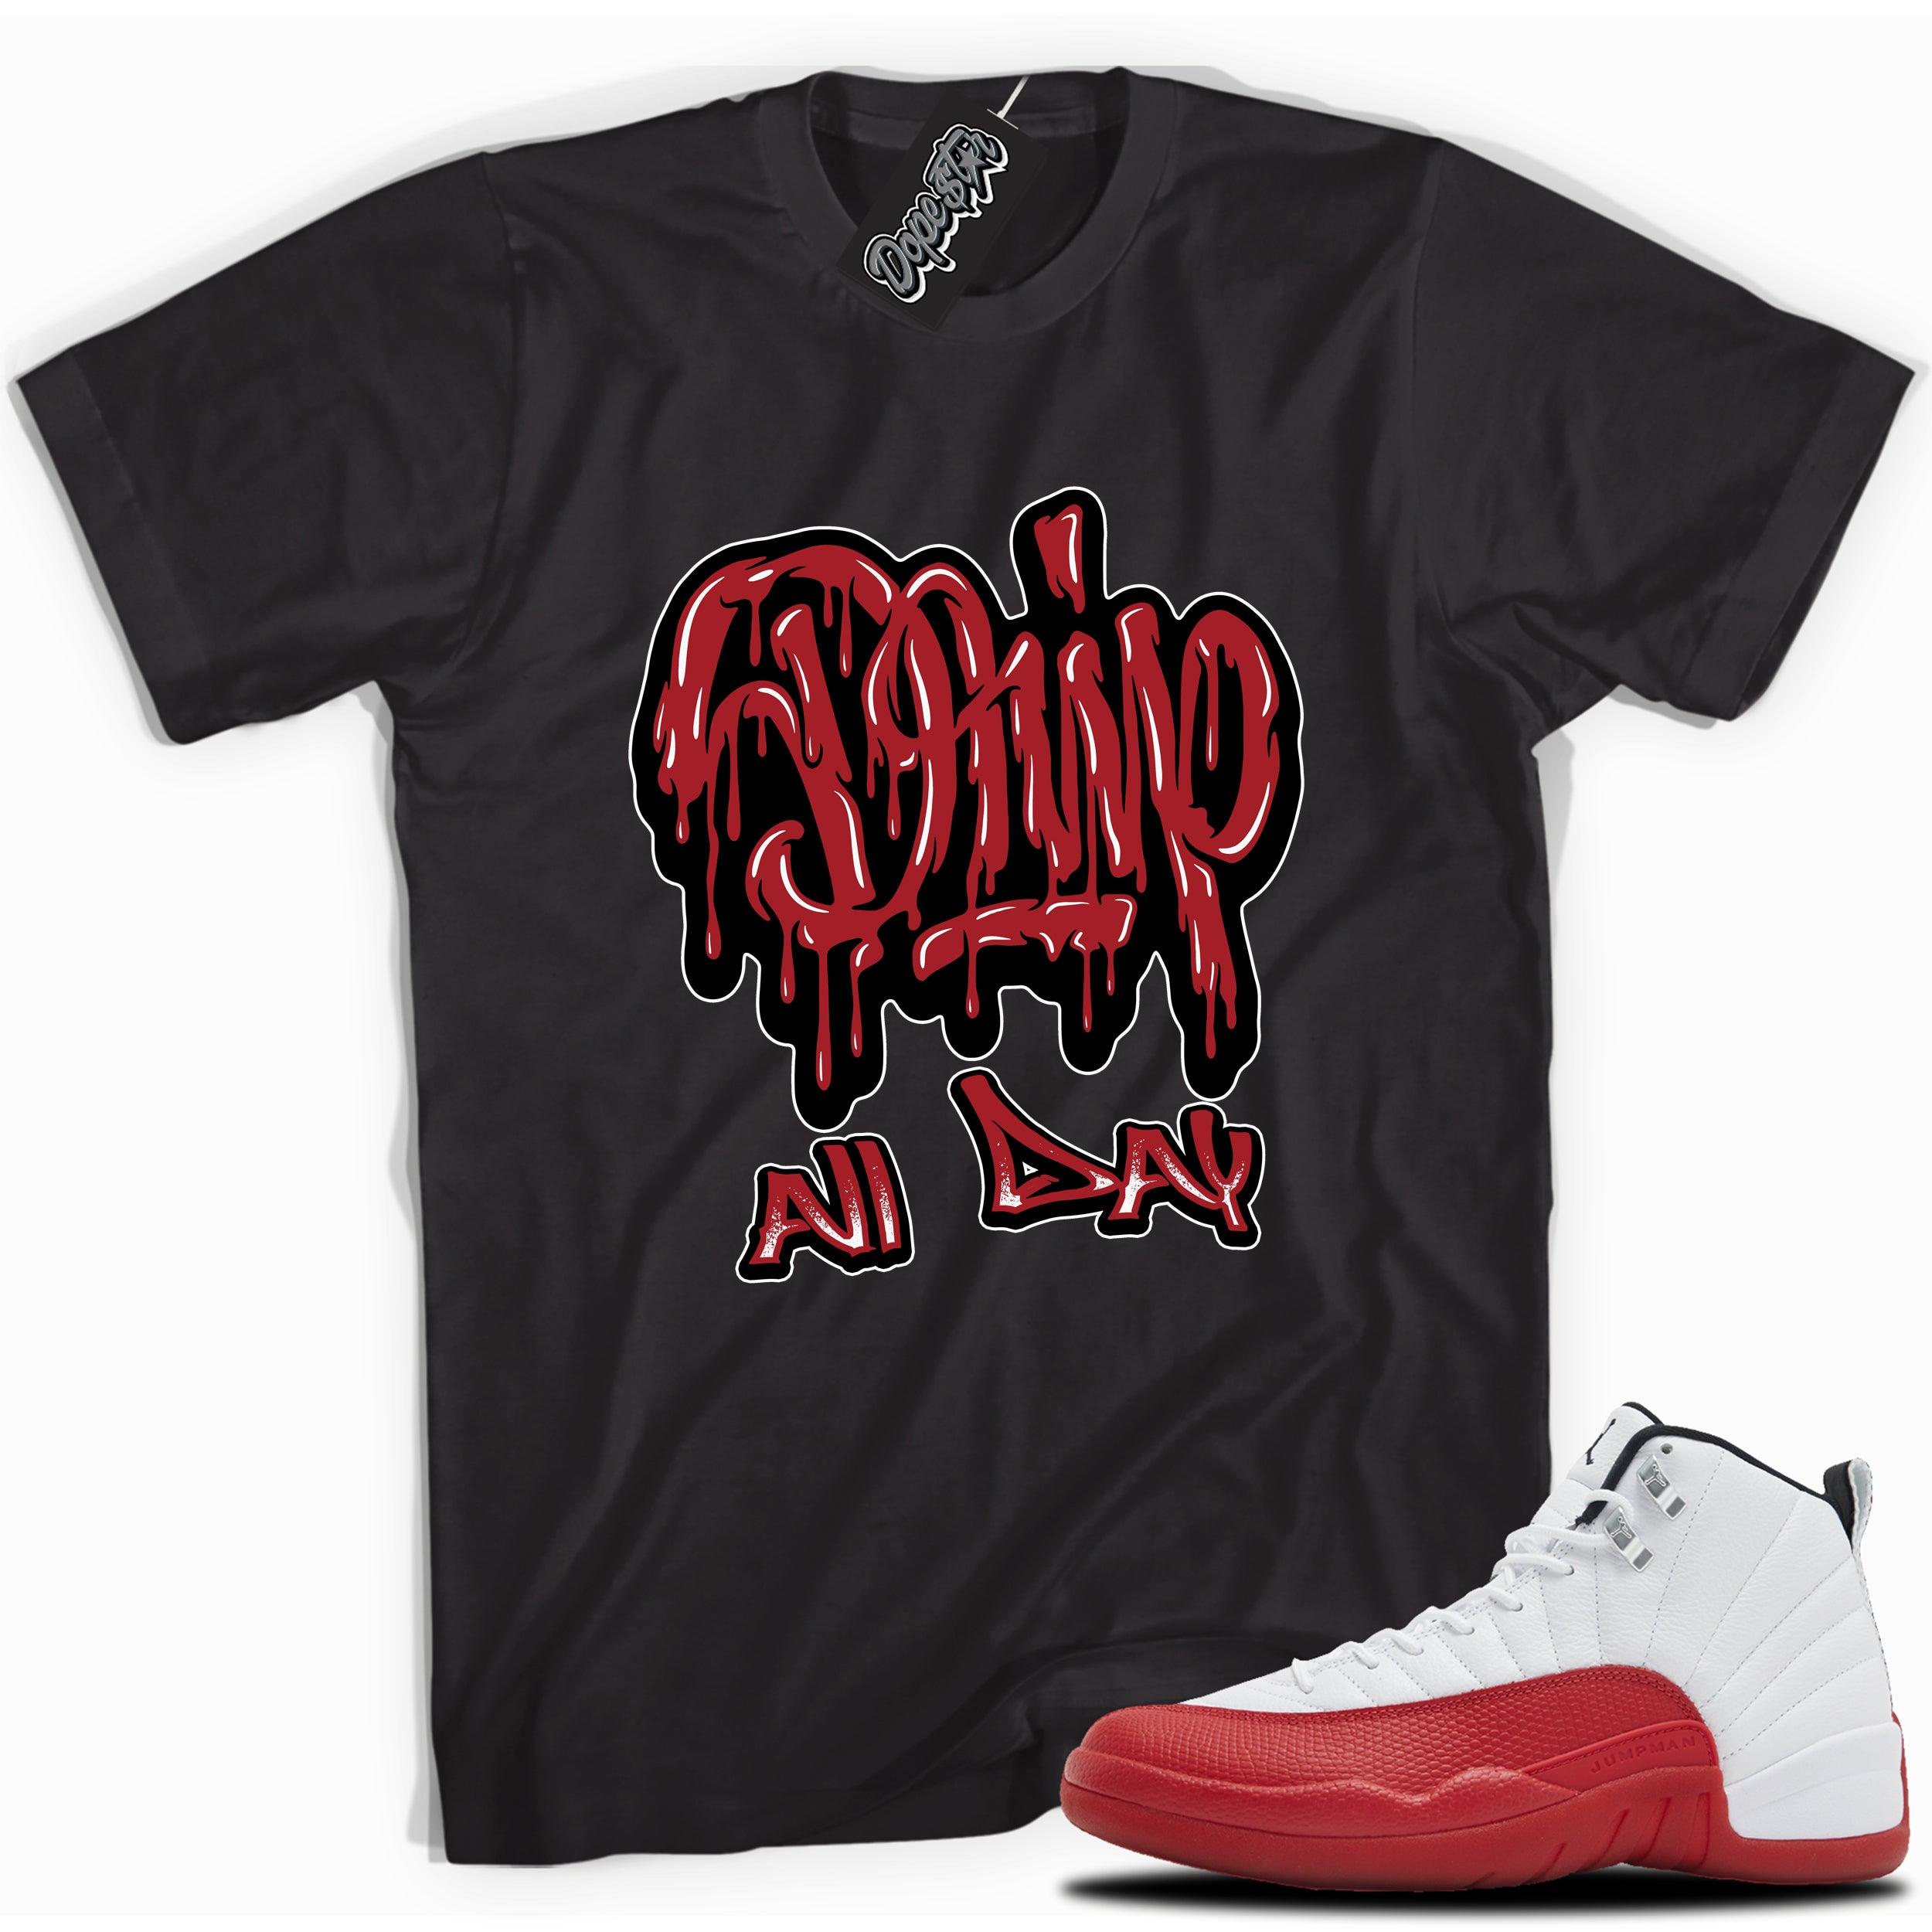 Cool Black graphic tee with “ Drip All Day ” print, that perfectly matches Air Jordan 12 Retro Cherry Red 2023 red and white sneakers 